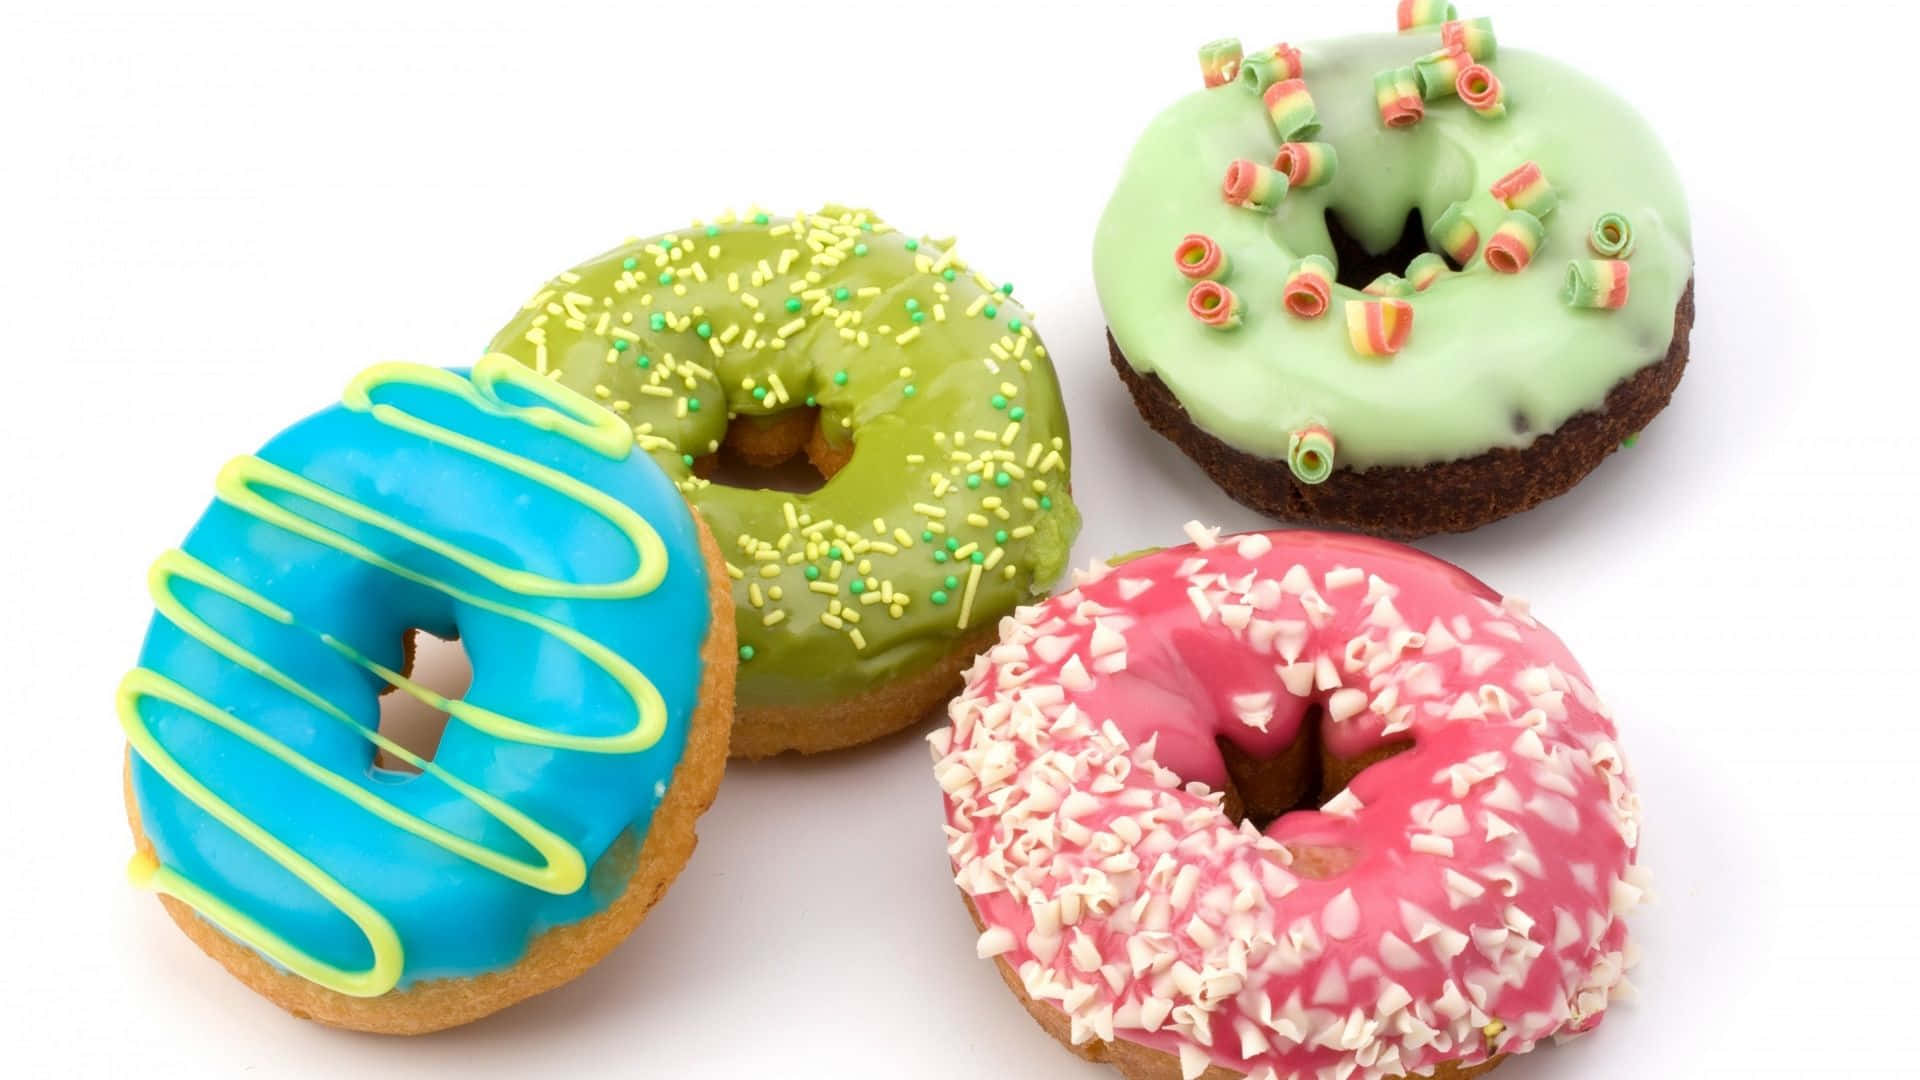 Four Colorful Donuts Are Shown On A White Background